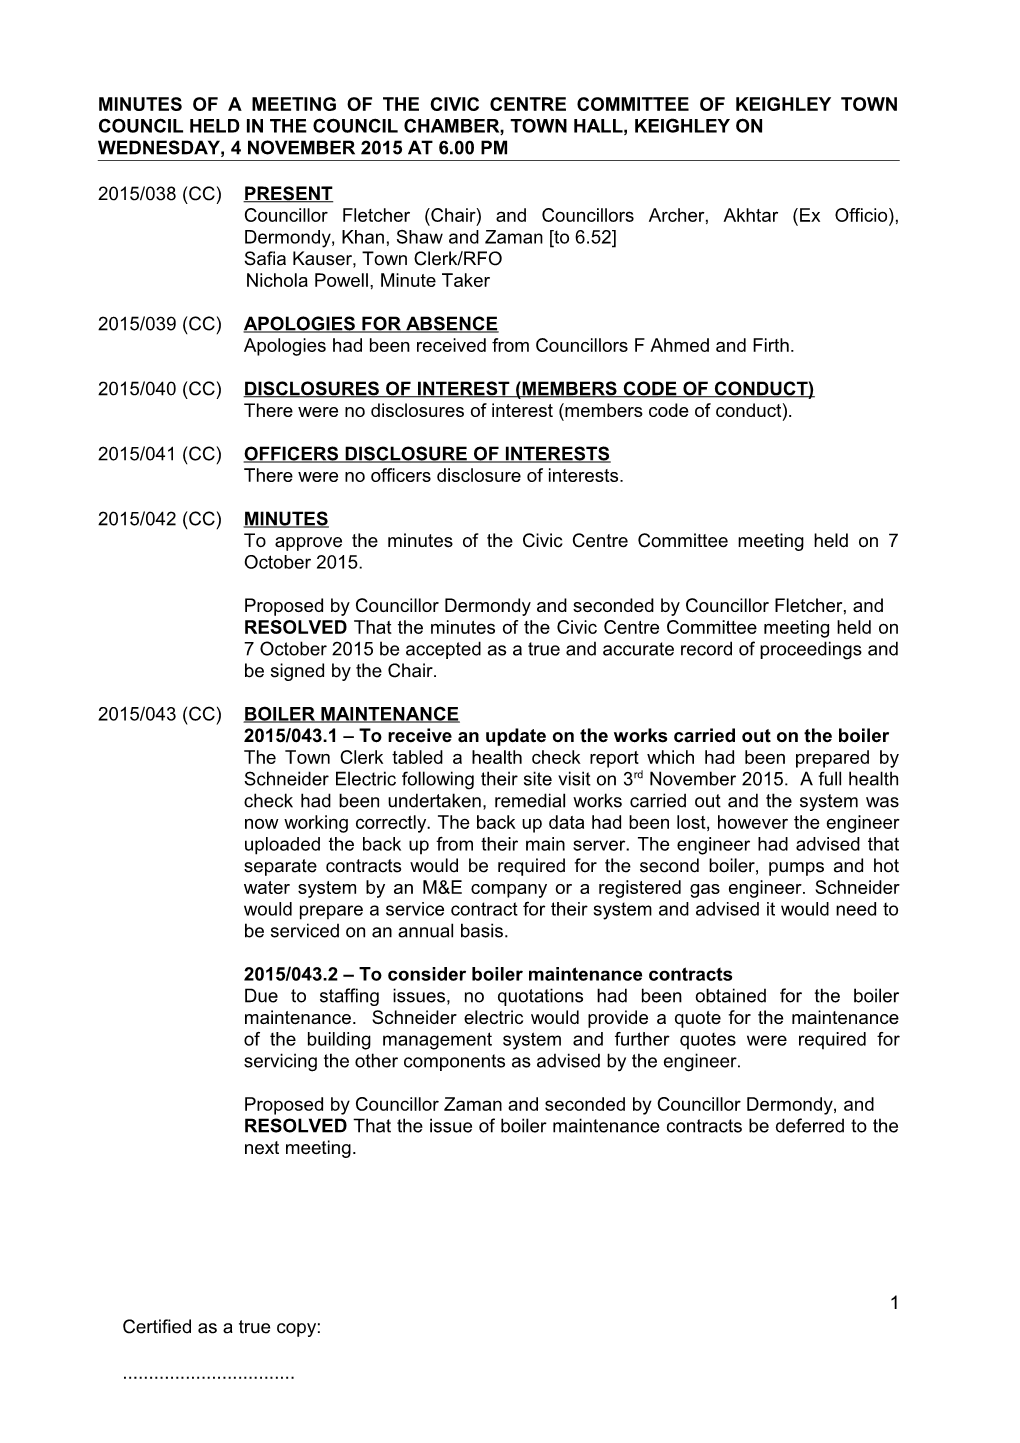 Minutes of a Meeting of the Events & Leisure Committee of Keighley Town Council Held In